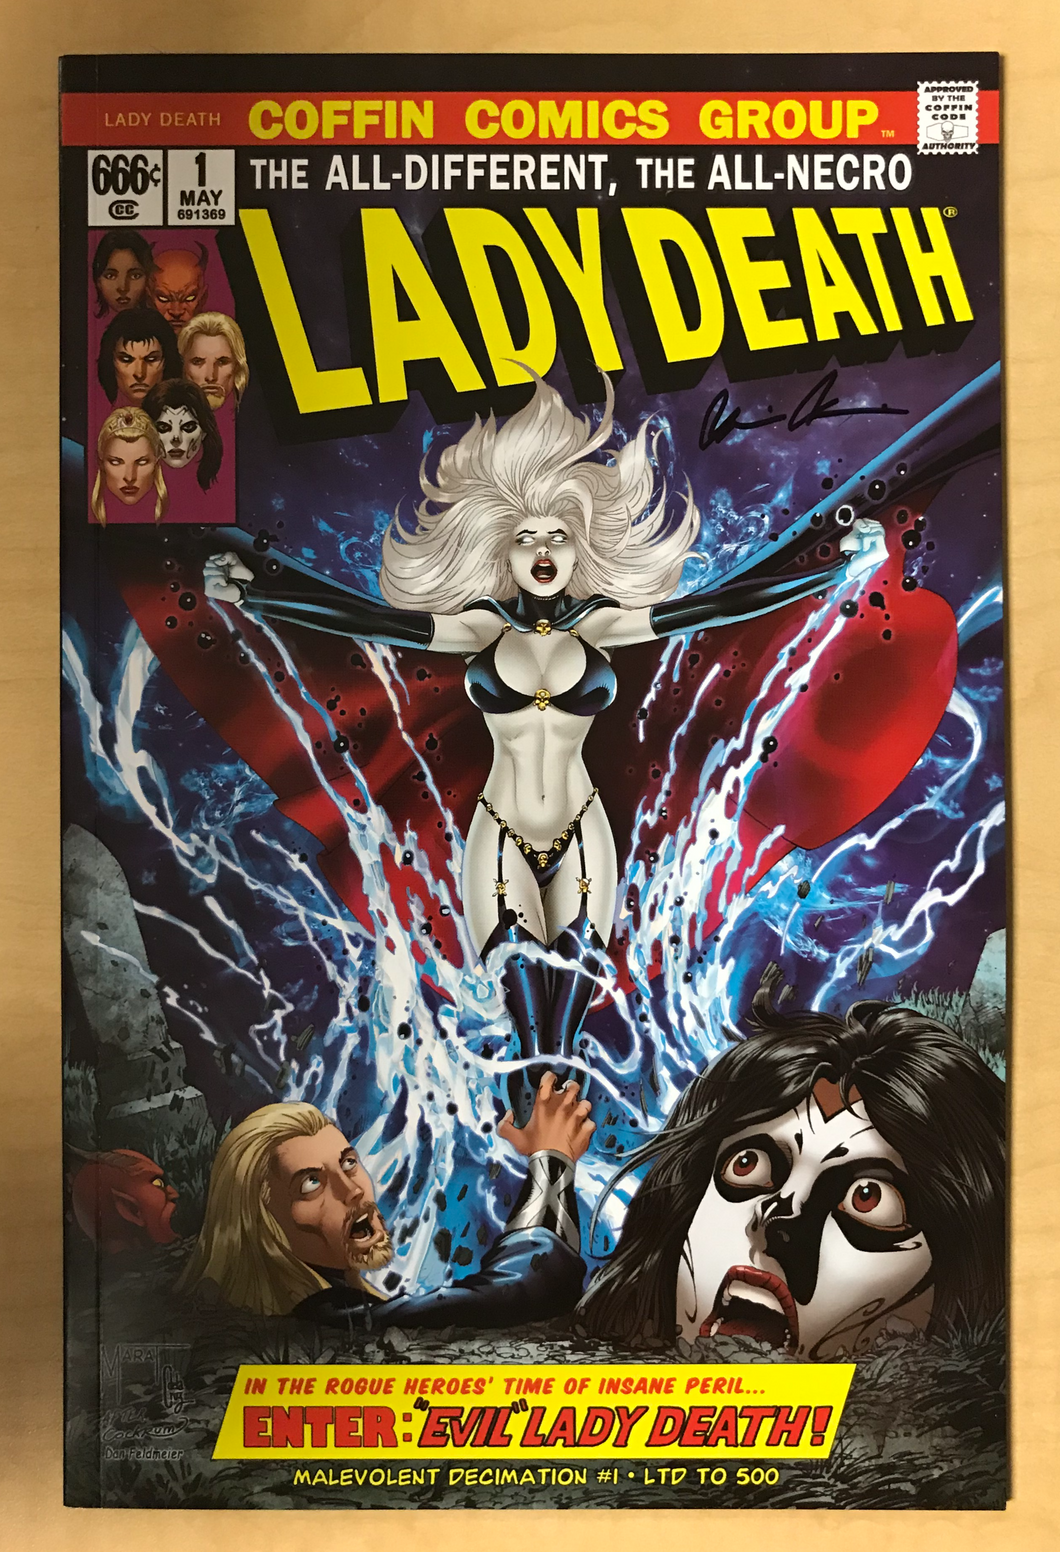 Lady Death: Malevolent Decimation #1 Uncanny X-Men #101 Dave Cockrum Homage Variant Cover by Marat Mychaels Signed by Brian Pulido w/ COA Limited to 500 Copies!!!